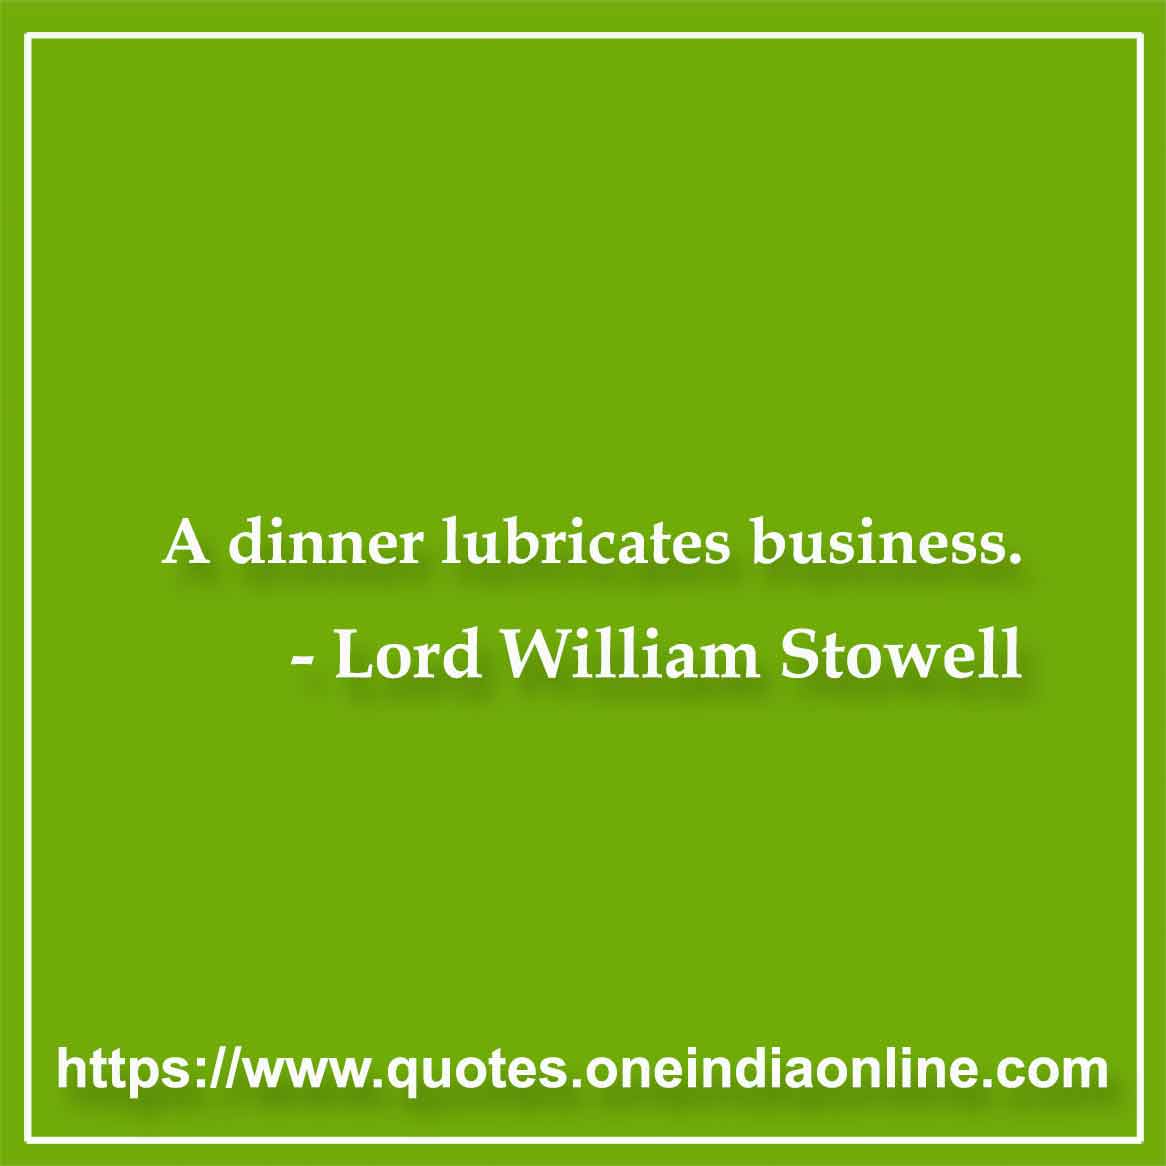 A dinner lubricates business.

- Lord William Stowell